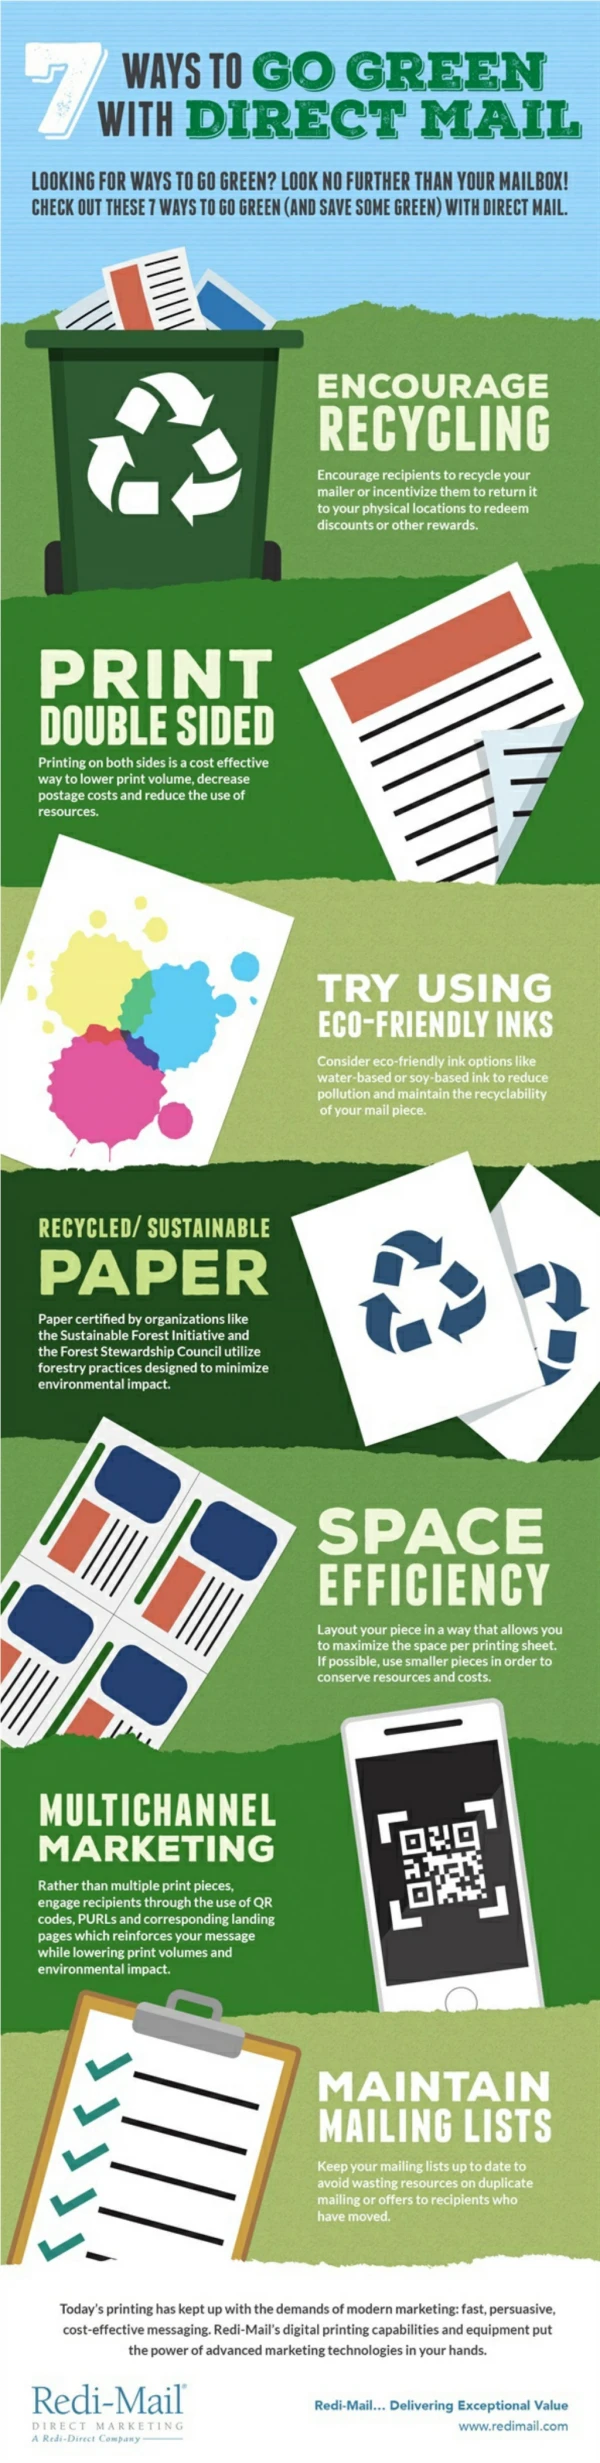 7 Ways to Go Green with Direct Mail